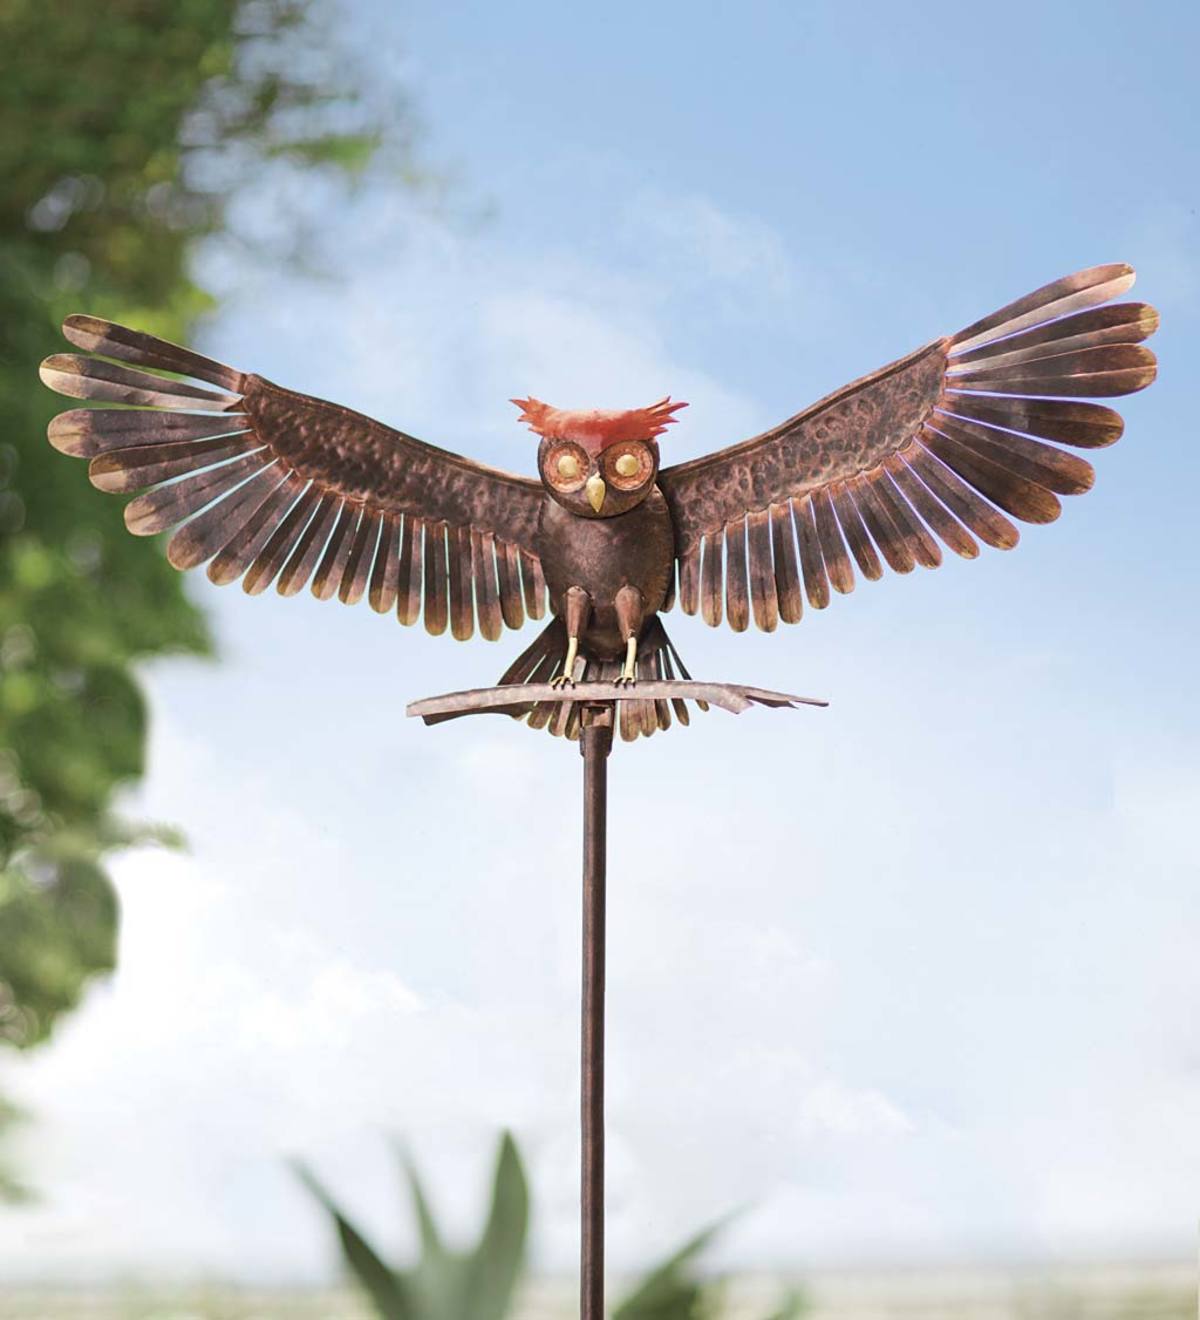 Handcrafted Bronze-Colored Metal Owl Garden Sculpture on Stake